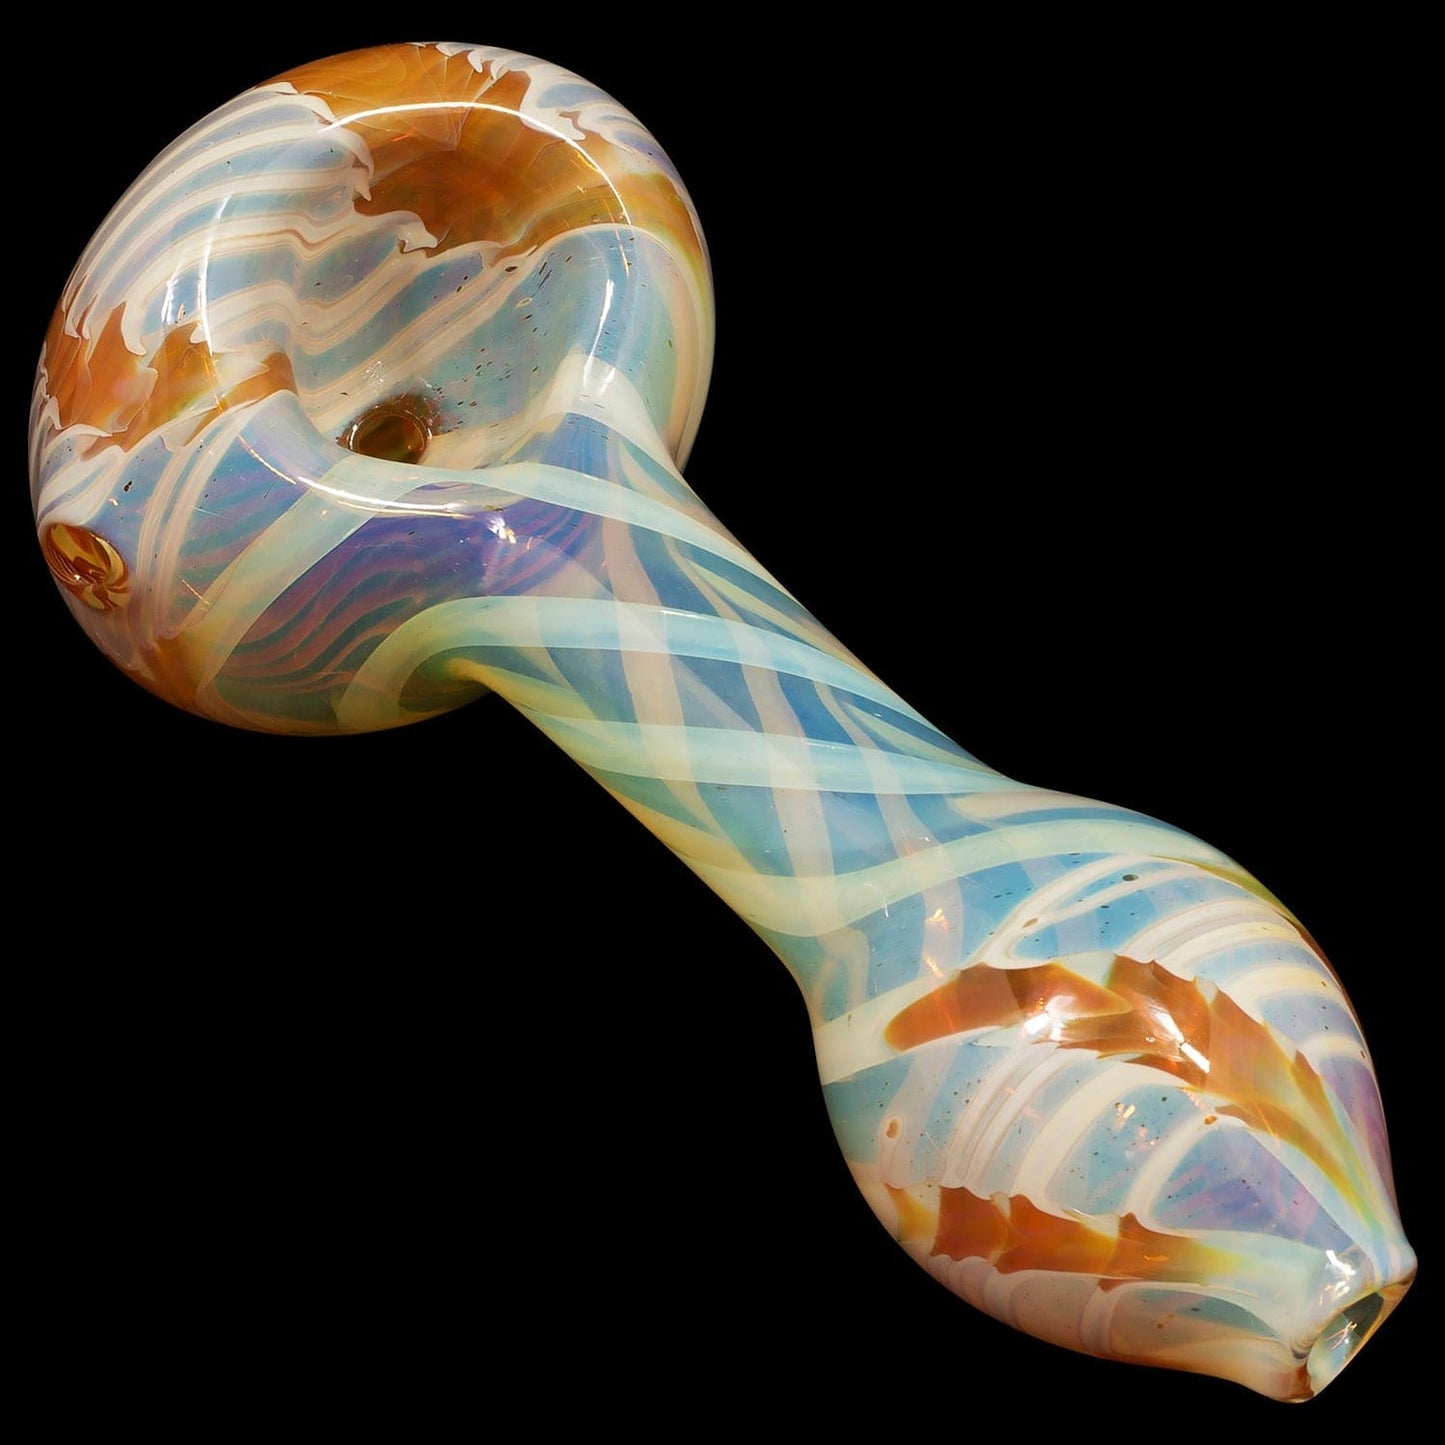 LA Pipes Hand Pipe Ivory / 4.5 Inch "Twisty Cane" Spoon Glass Pipe (Various Colors)